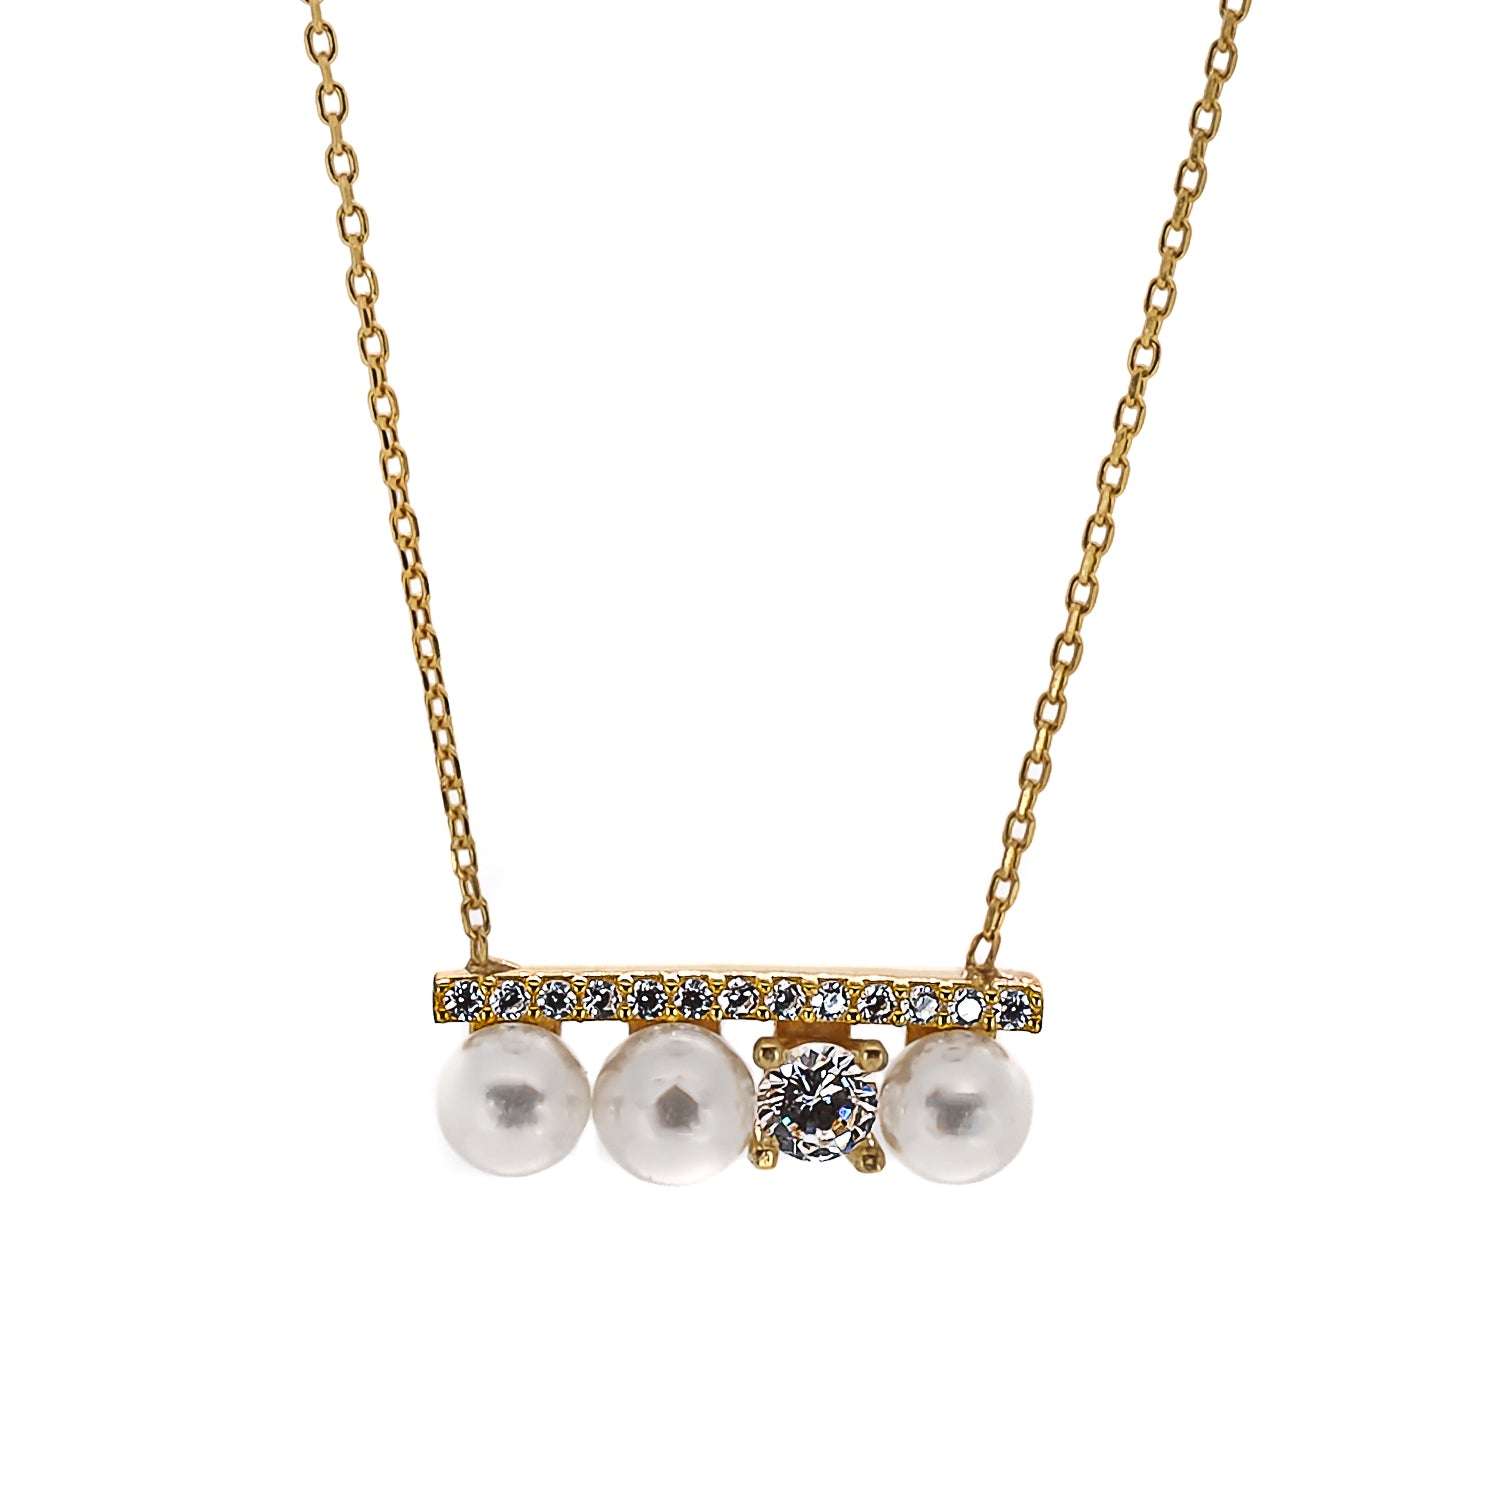 Pearl & Diamond Gold Necklace - Timeless beauty and contemporary chic.